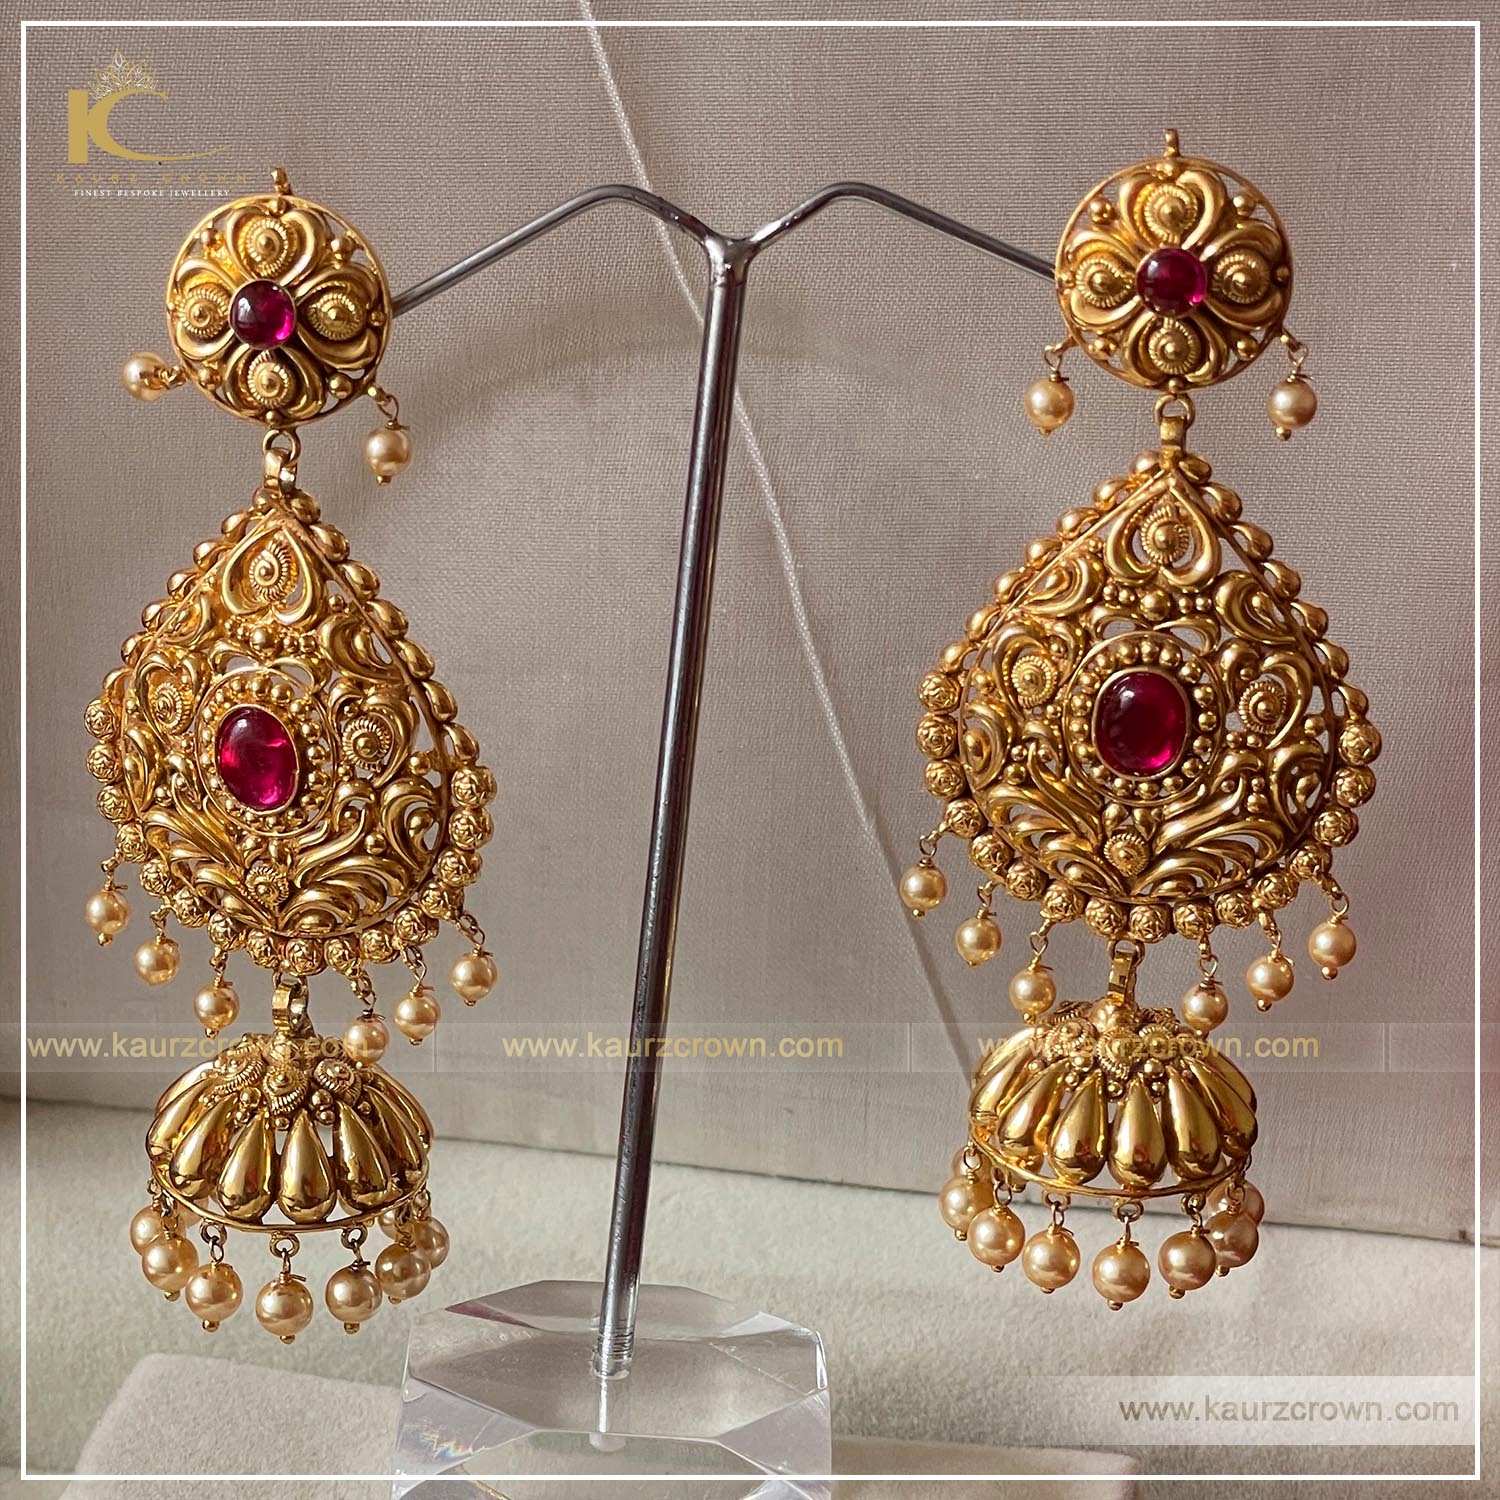 Balori Traditional Antique Gold Plated Earrings , kaurz crown , punjabi jewellery , gold plated , kaurz crown , online jewellery store